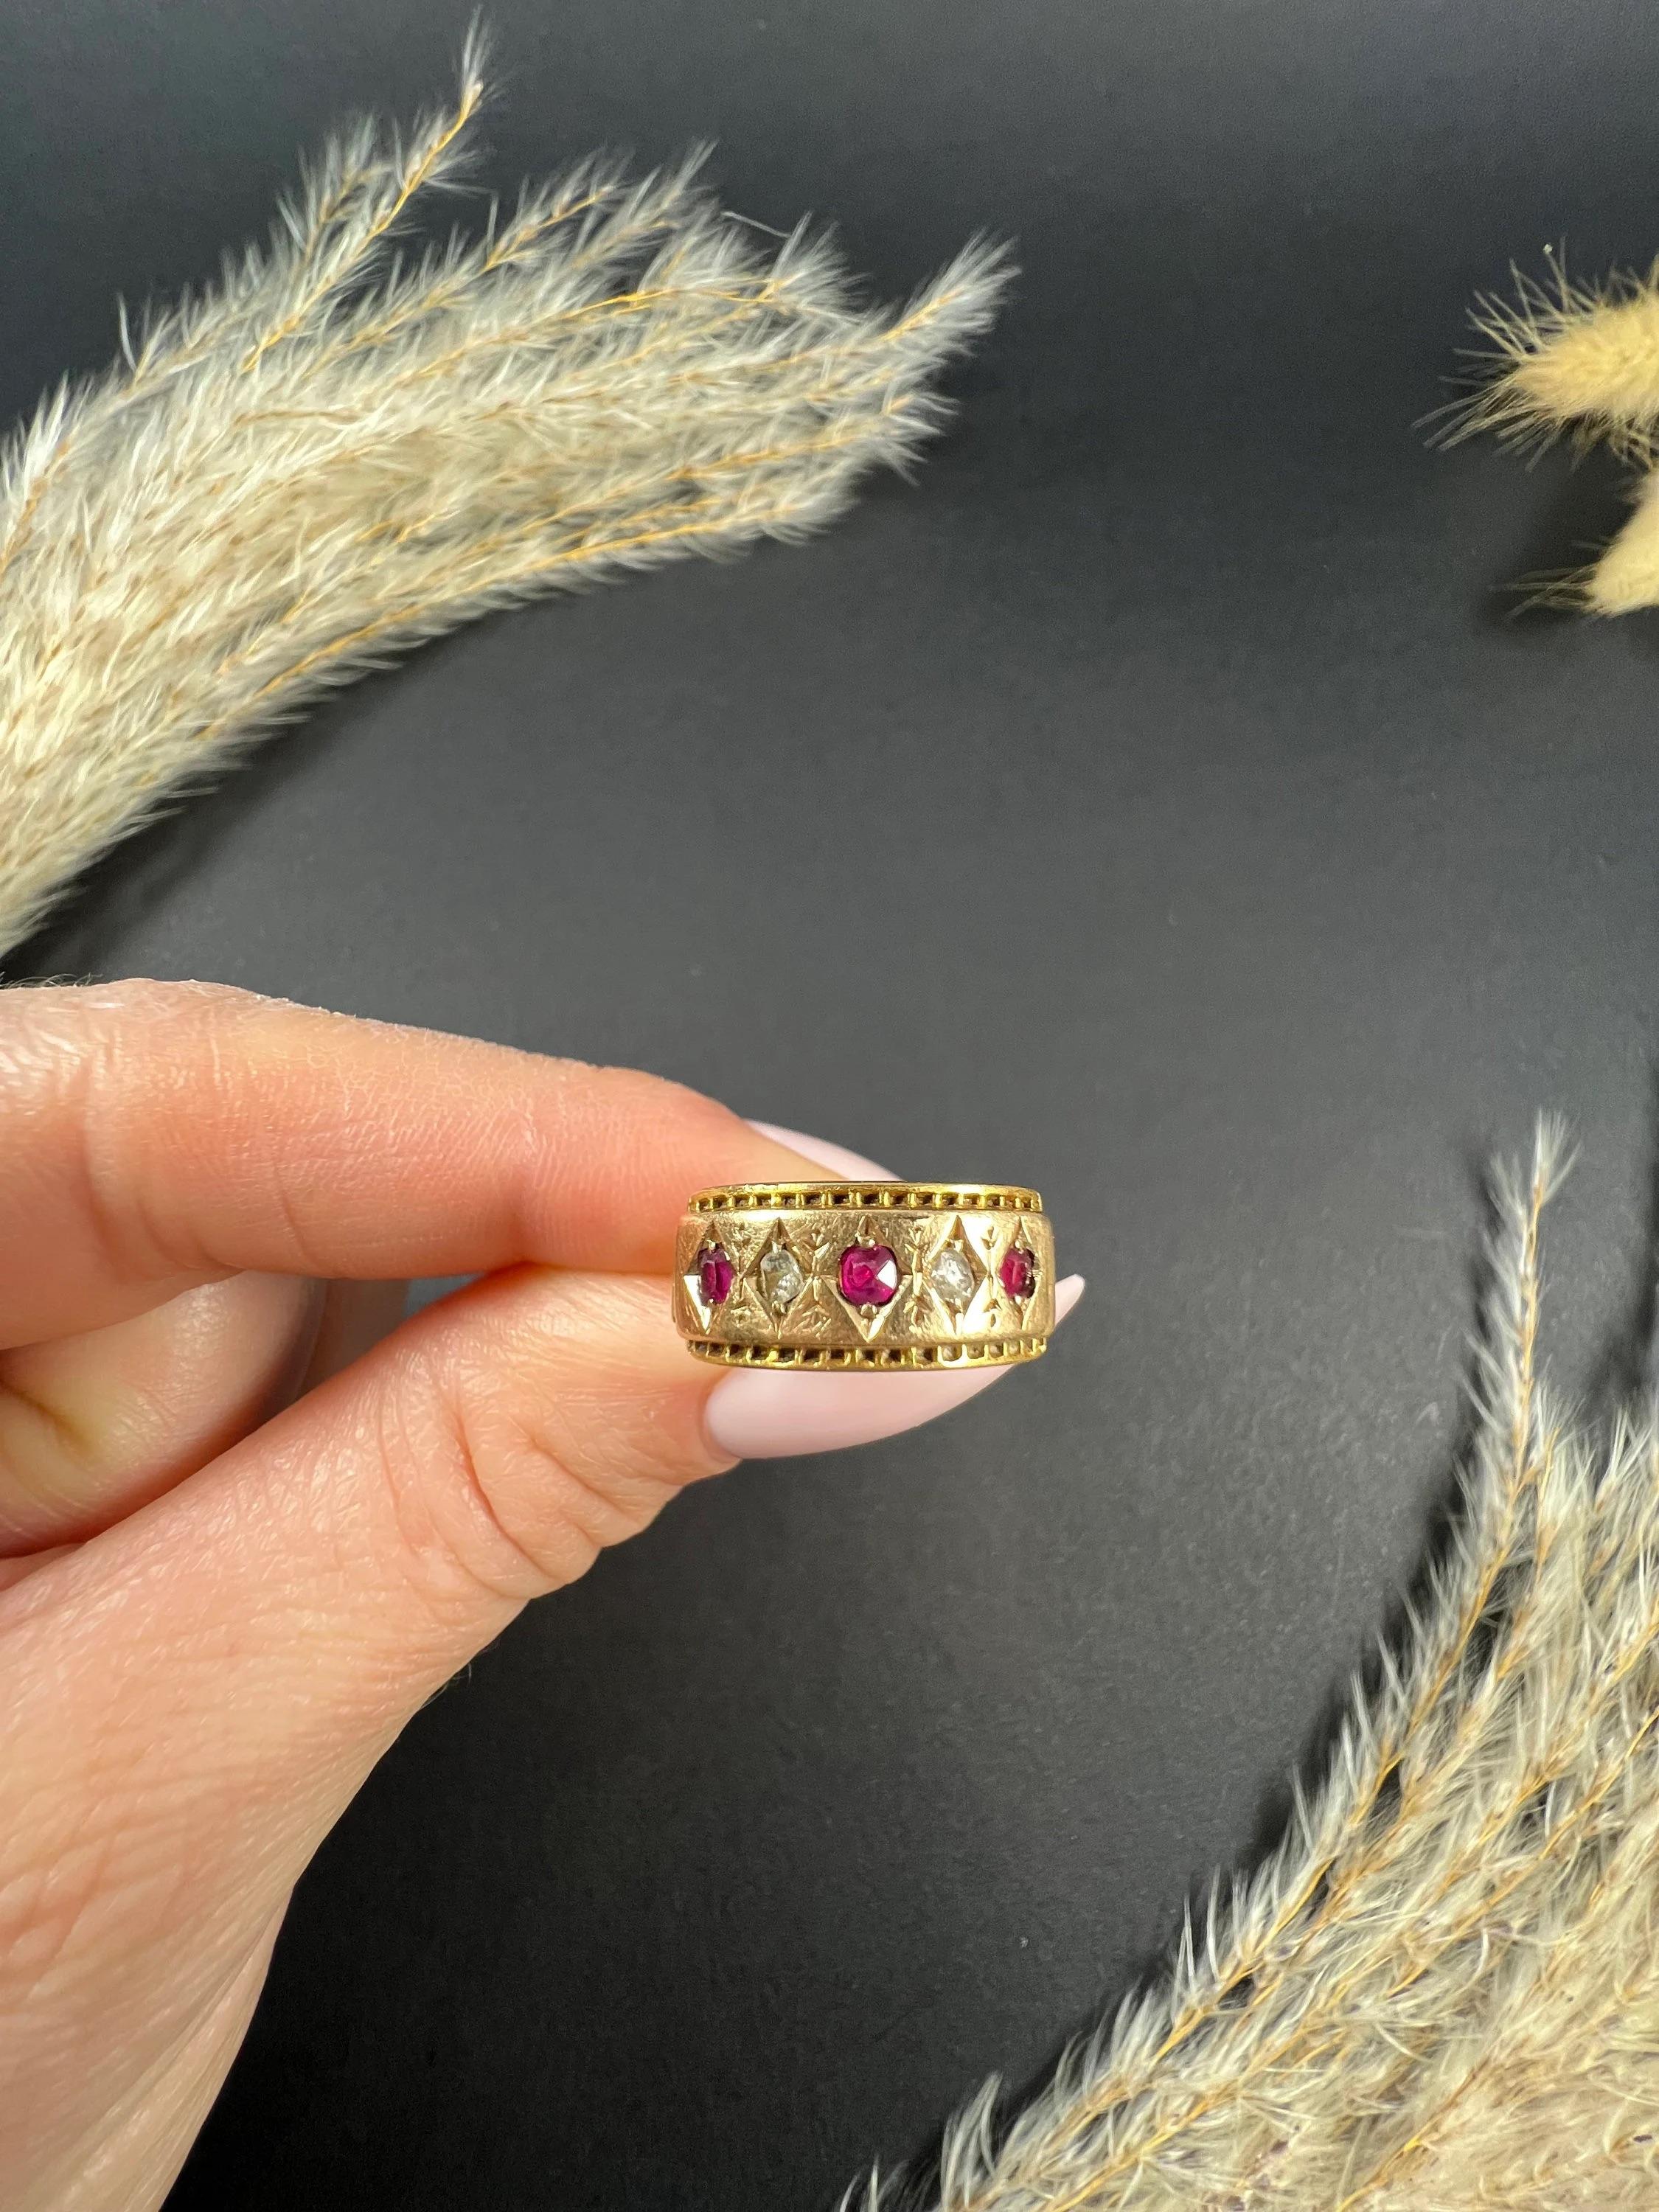 Antique Ring

15ct Gold Stamped

Hallmarked Birmingham 1879

Makers Mark H & S

This 15ct gold ring is a true beauty and features alternating natural rubies and diamonds elegantly set in pretty diamond-shaped settings. The ring is set in yellow gold